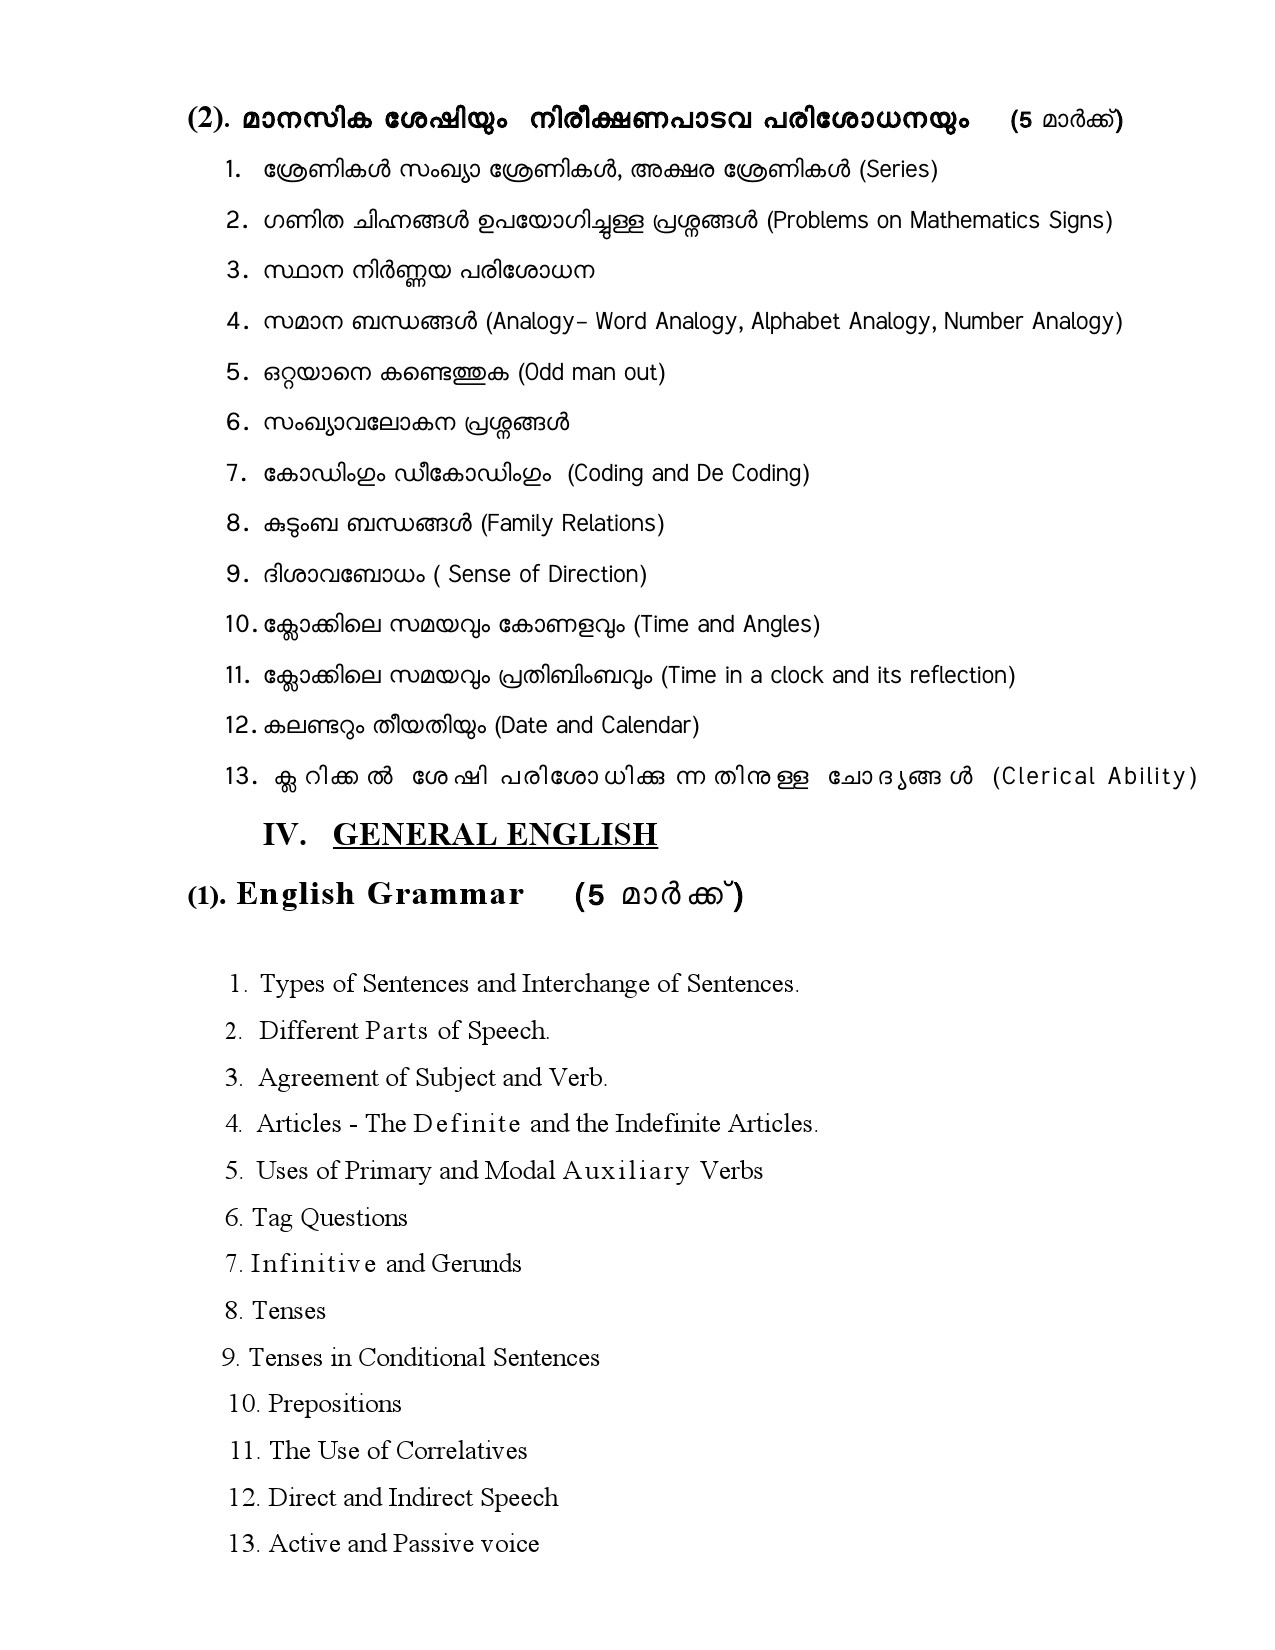 Beat Forest Officer Final Examination Syllabus For Plus Two Level - Notification Image 8